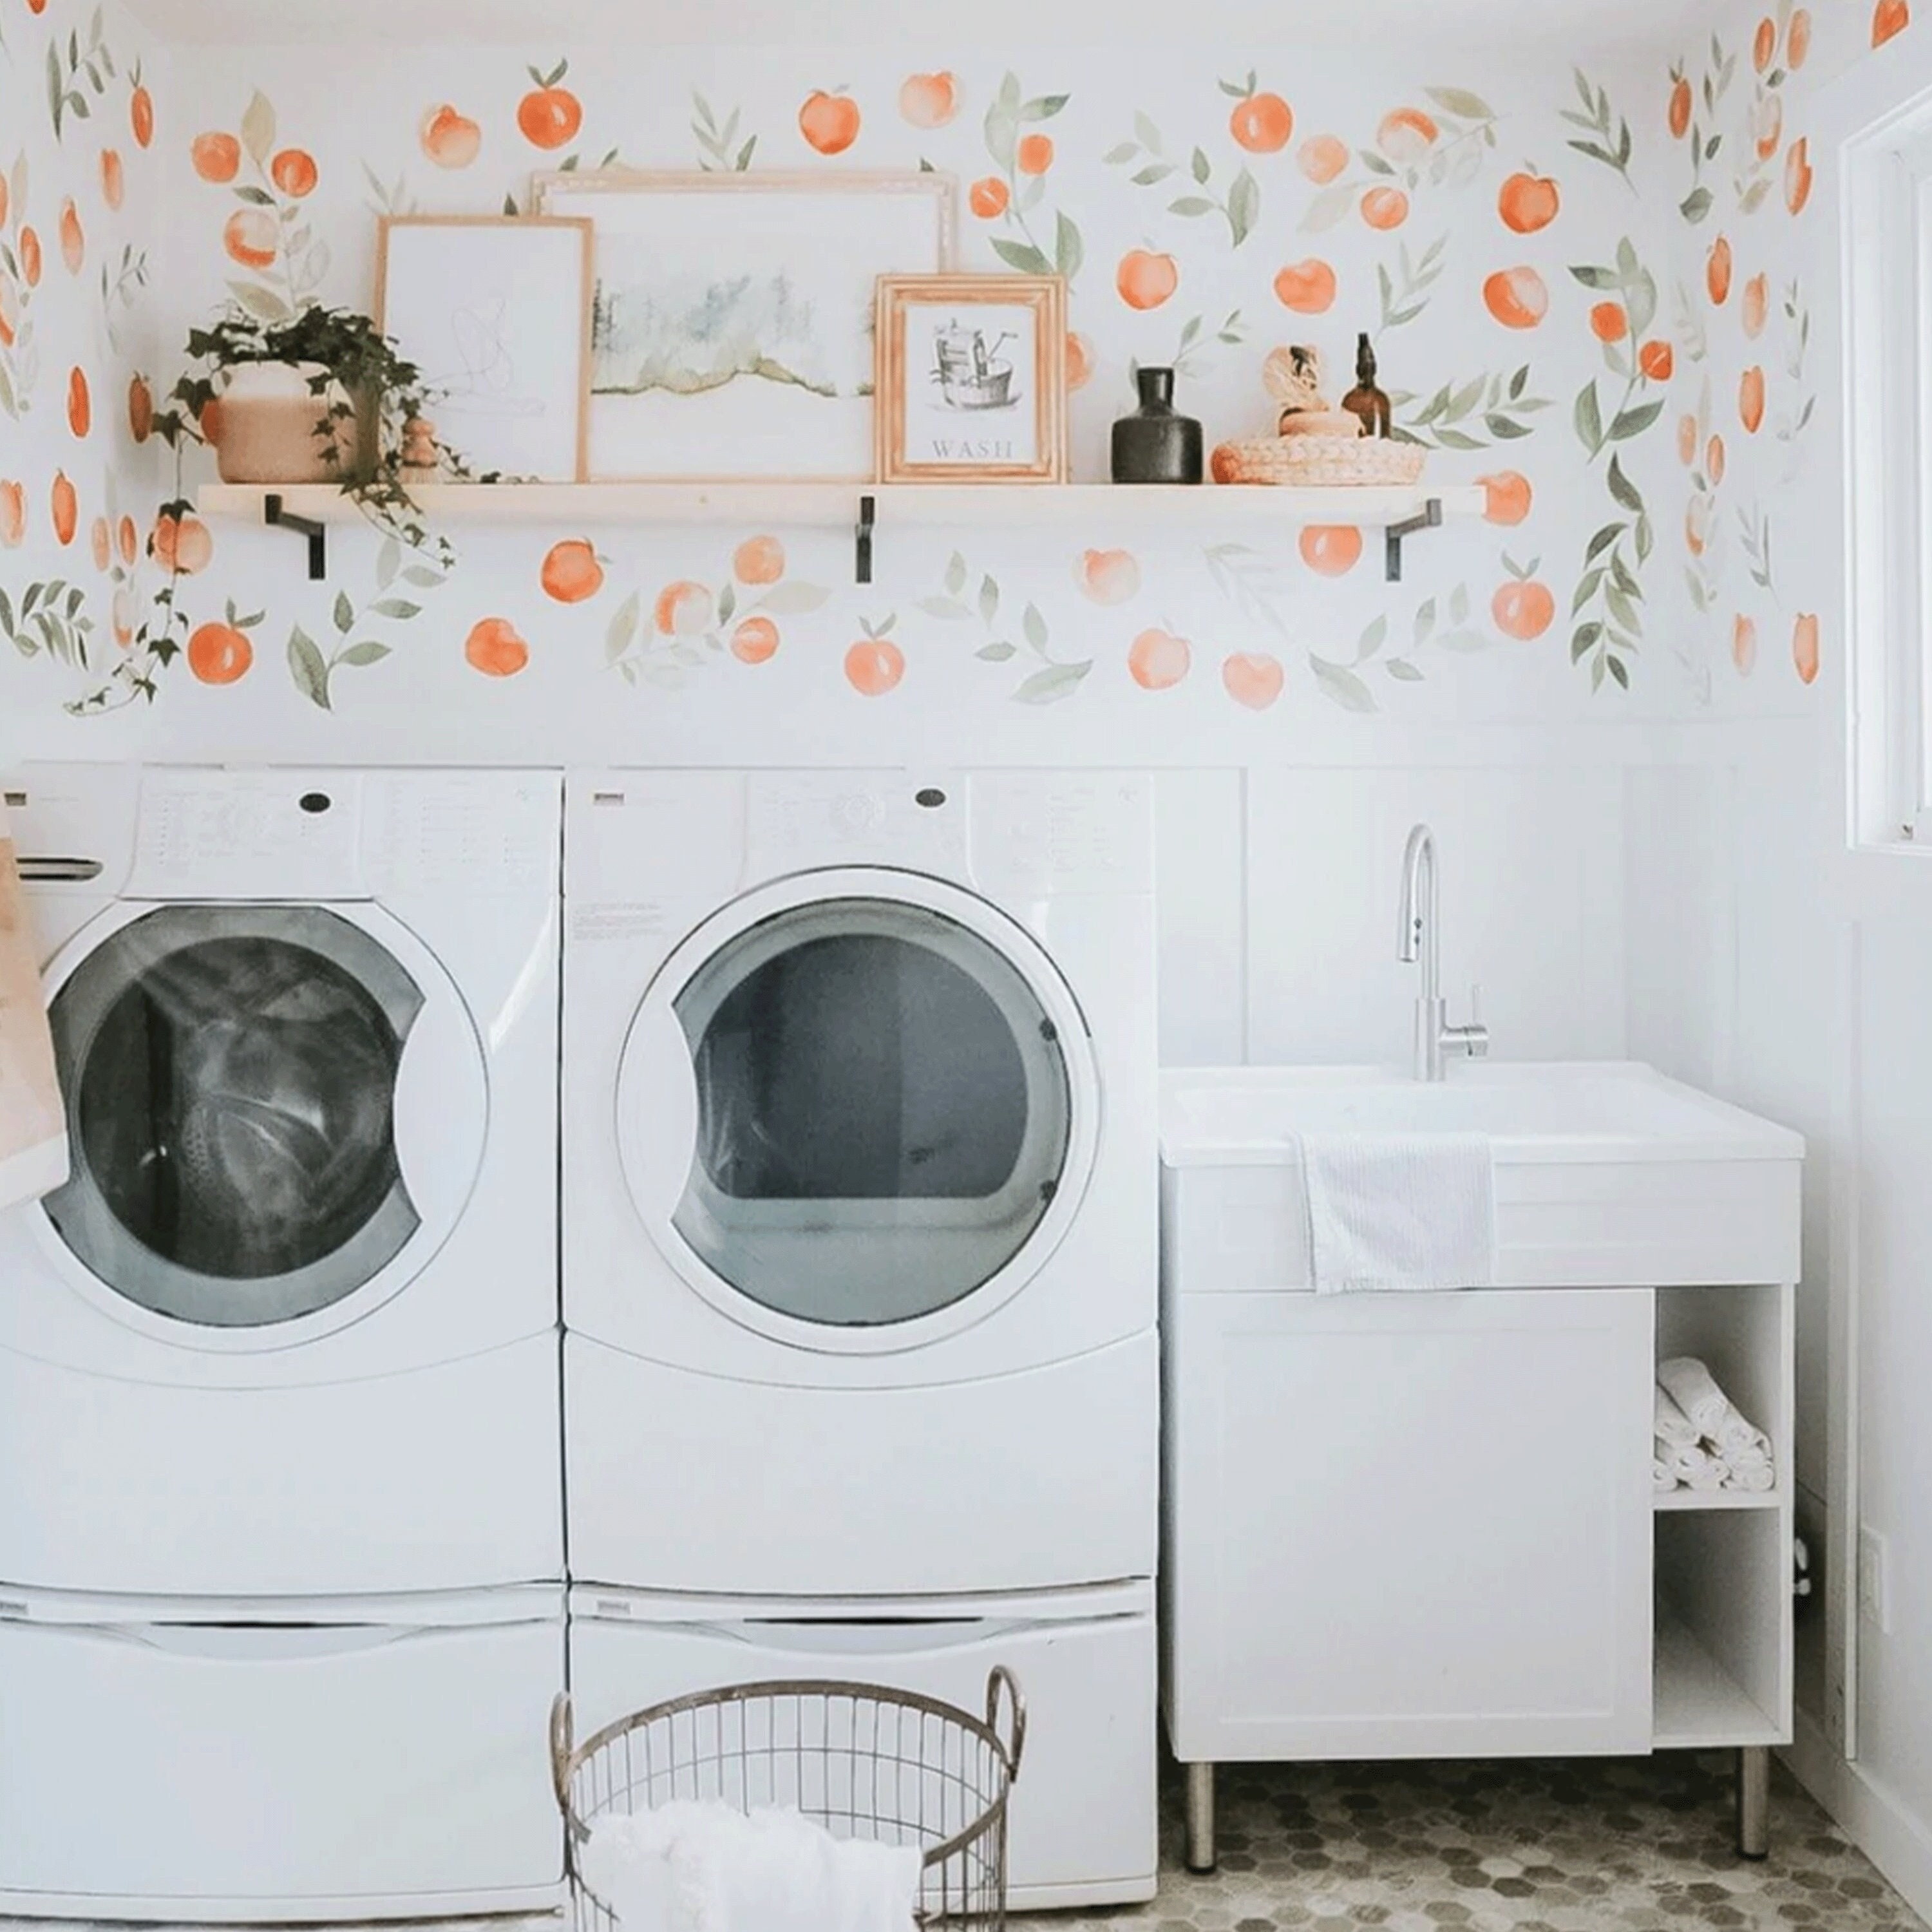 Laundry Room Makeover with Wallpaper  Before  After  Gathered in the  Kitchen